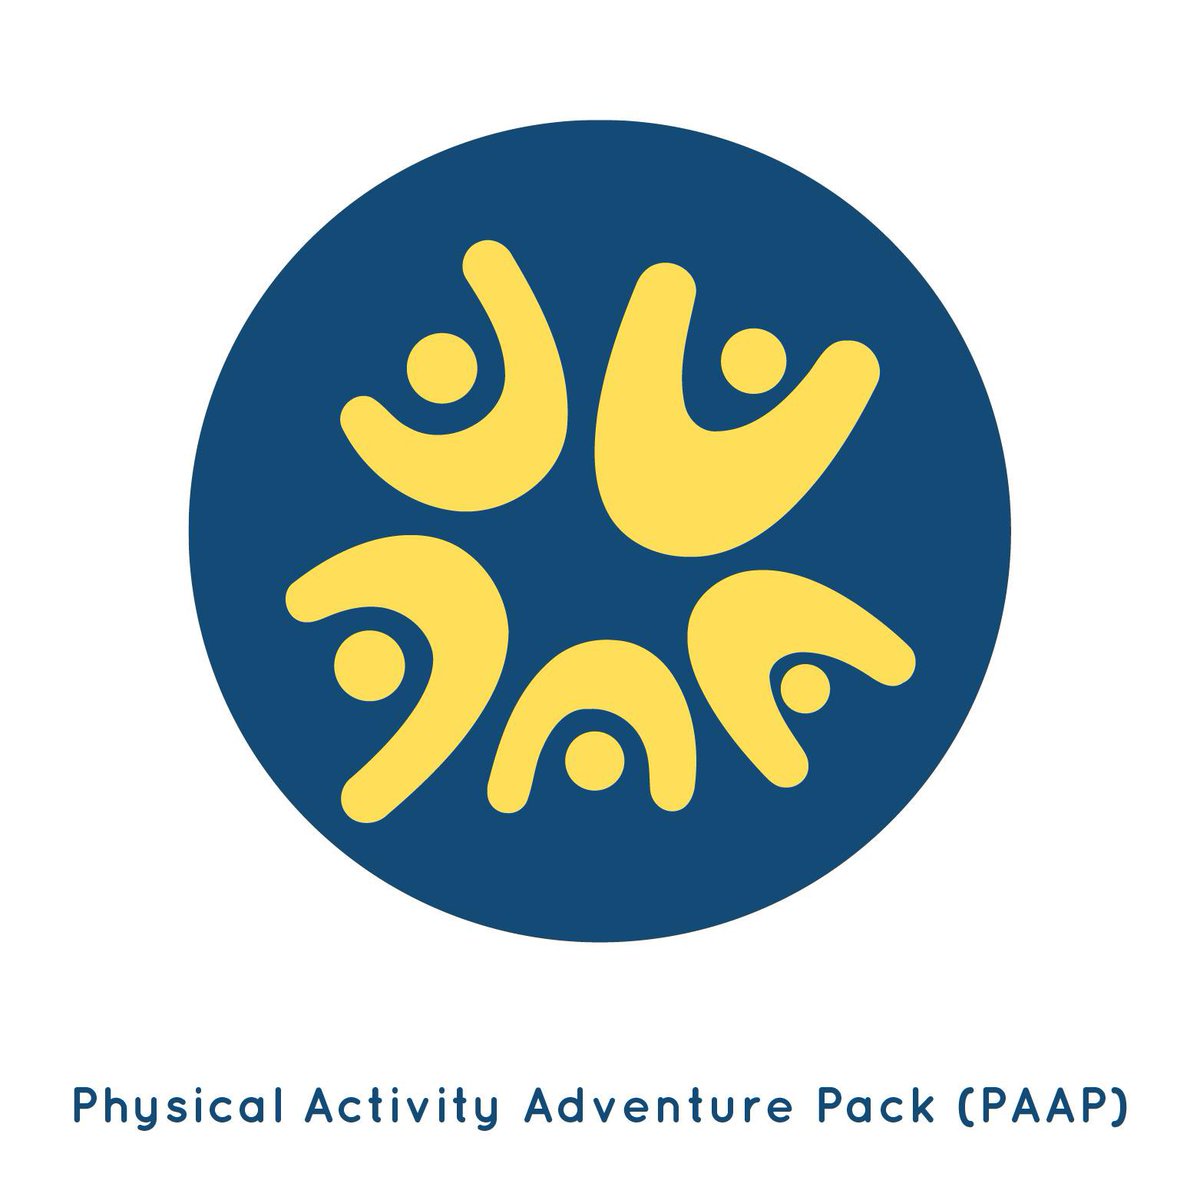 Extremely delighted to have cowritten a scheme of work for #EYFS #earlyyears underpinned in early childhood development and developmentally appropriate practice to support movement play, #physed and #physicaldevelopment find out more @PhysicalAAP @MrsBPearson #primarypeshare